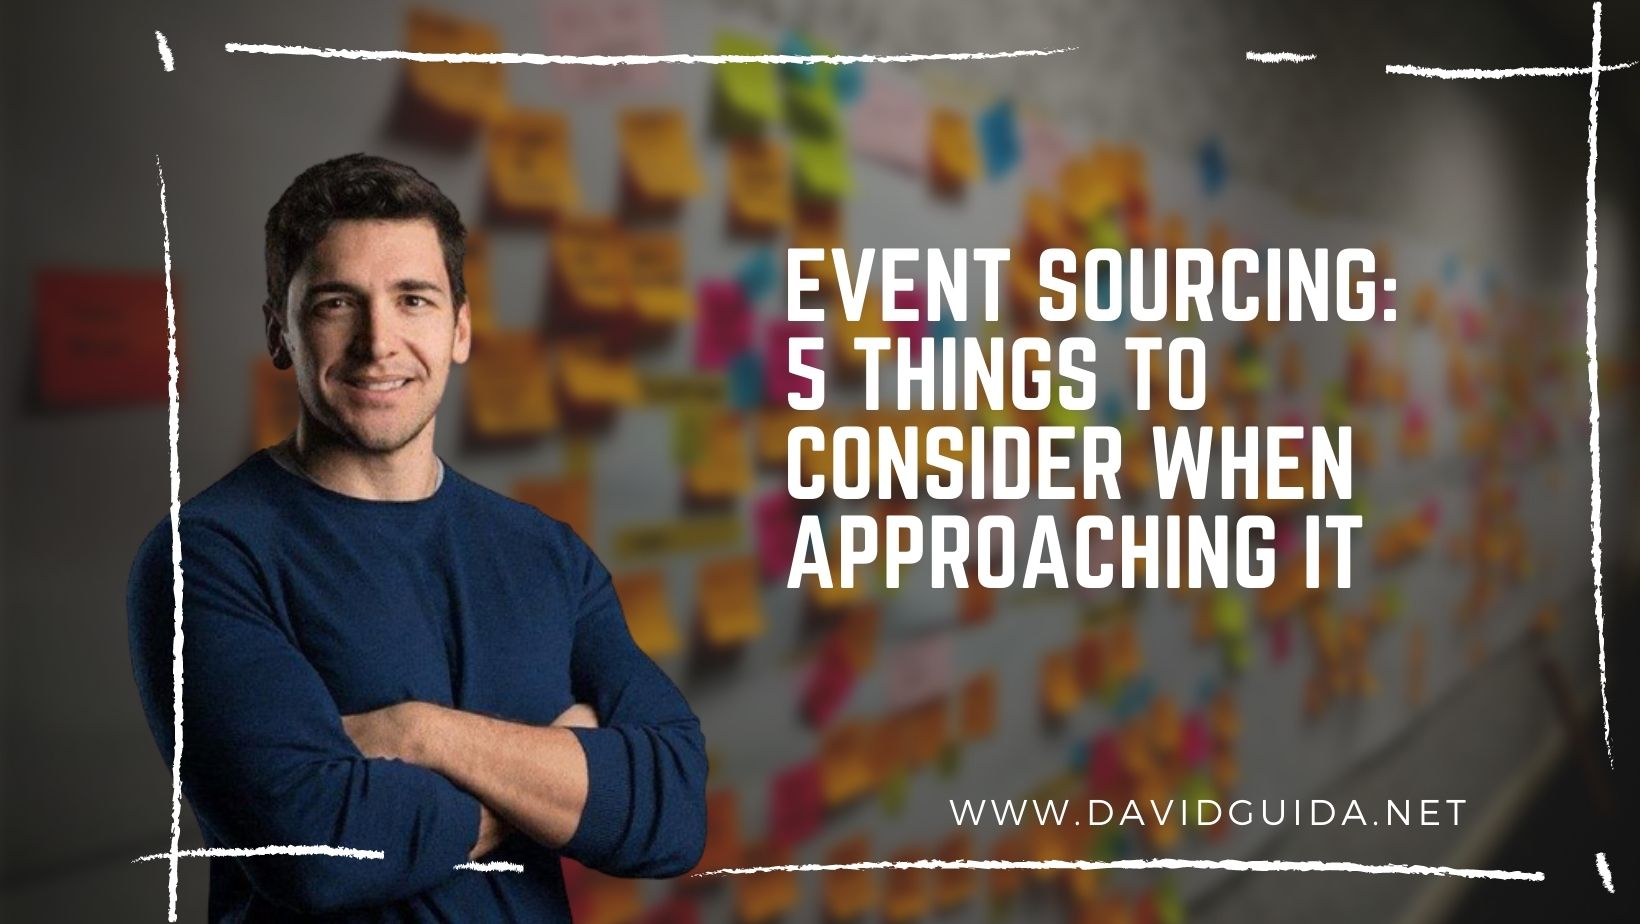 Event Sourcing: 5 things to consider when approaching it